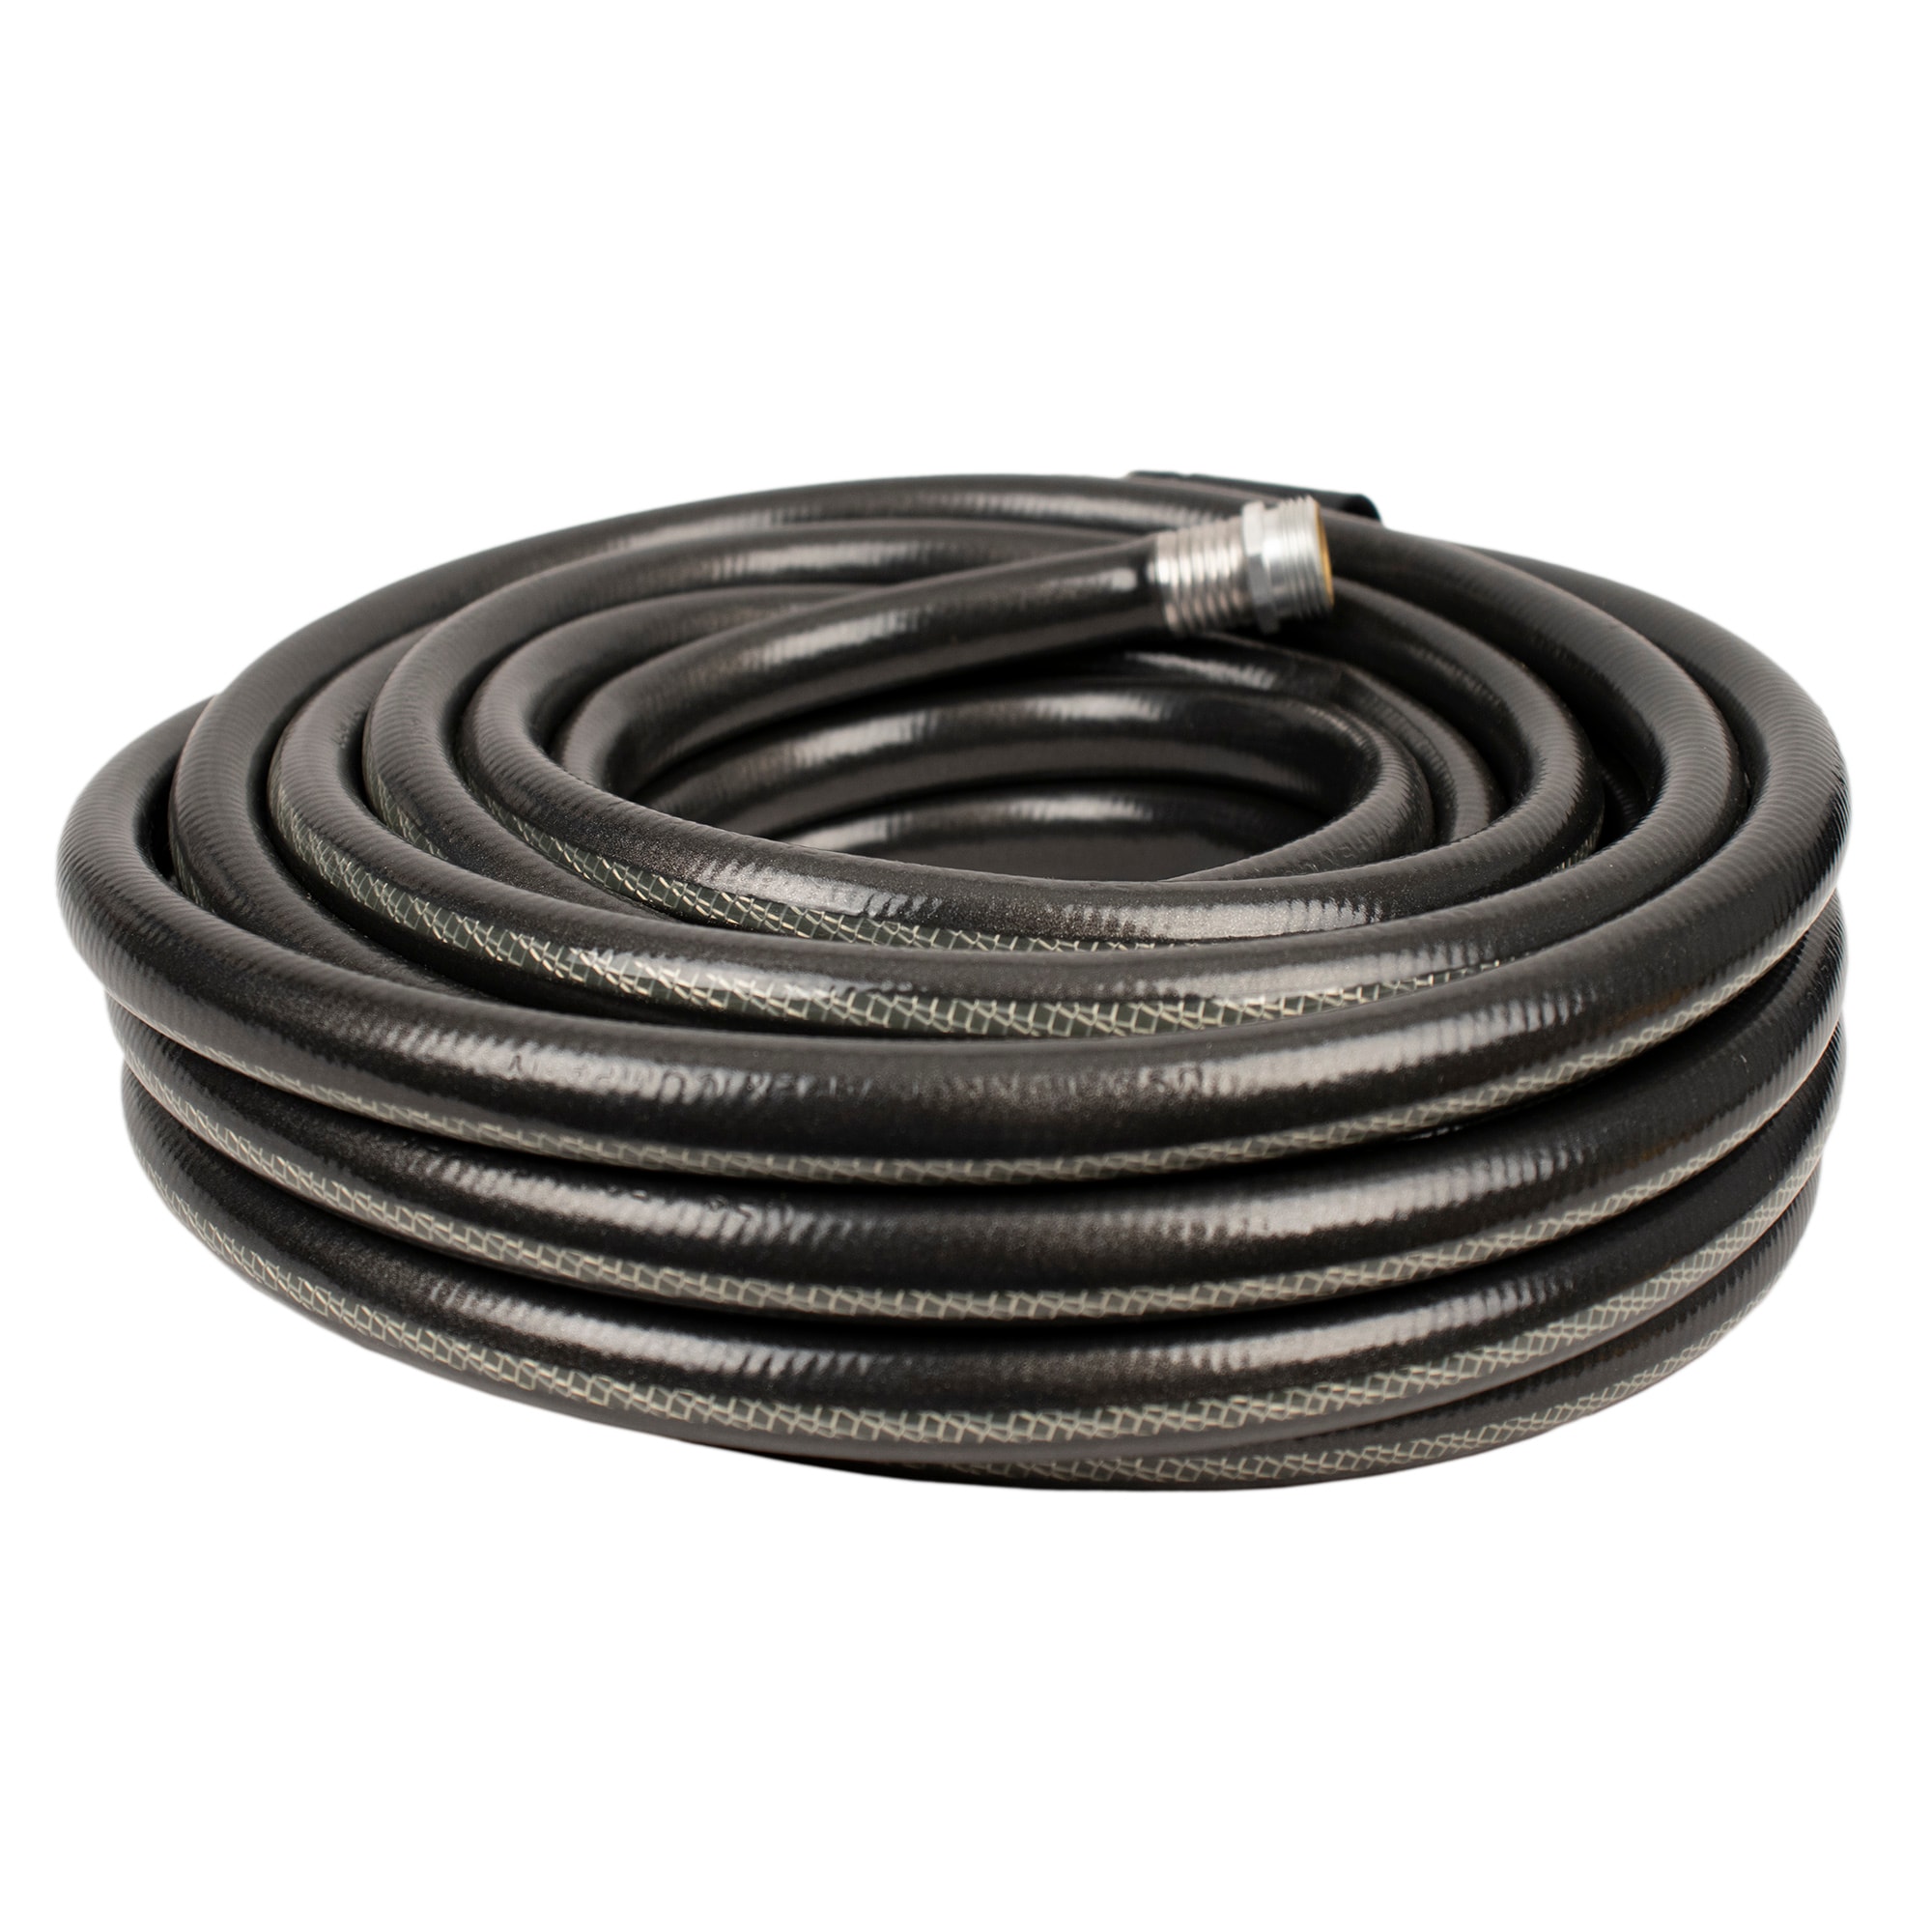 Image of Flexible Rubber Garden Hose from Lowes